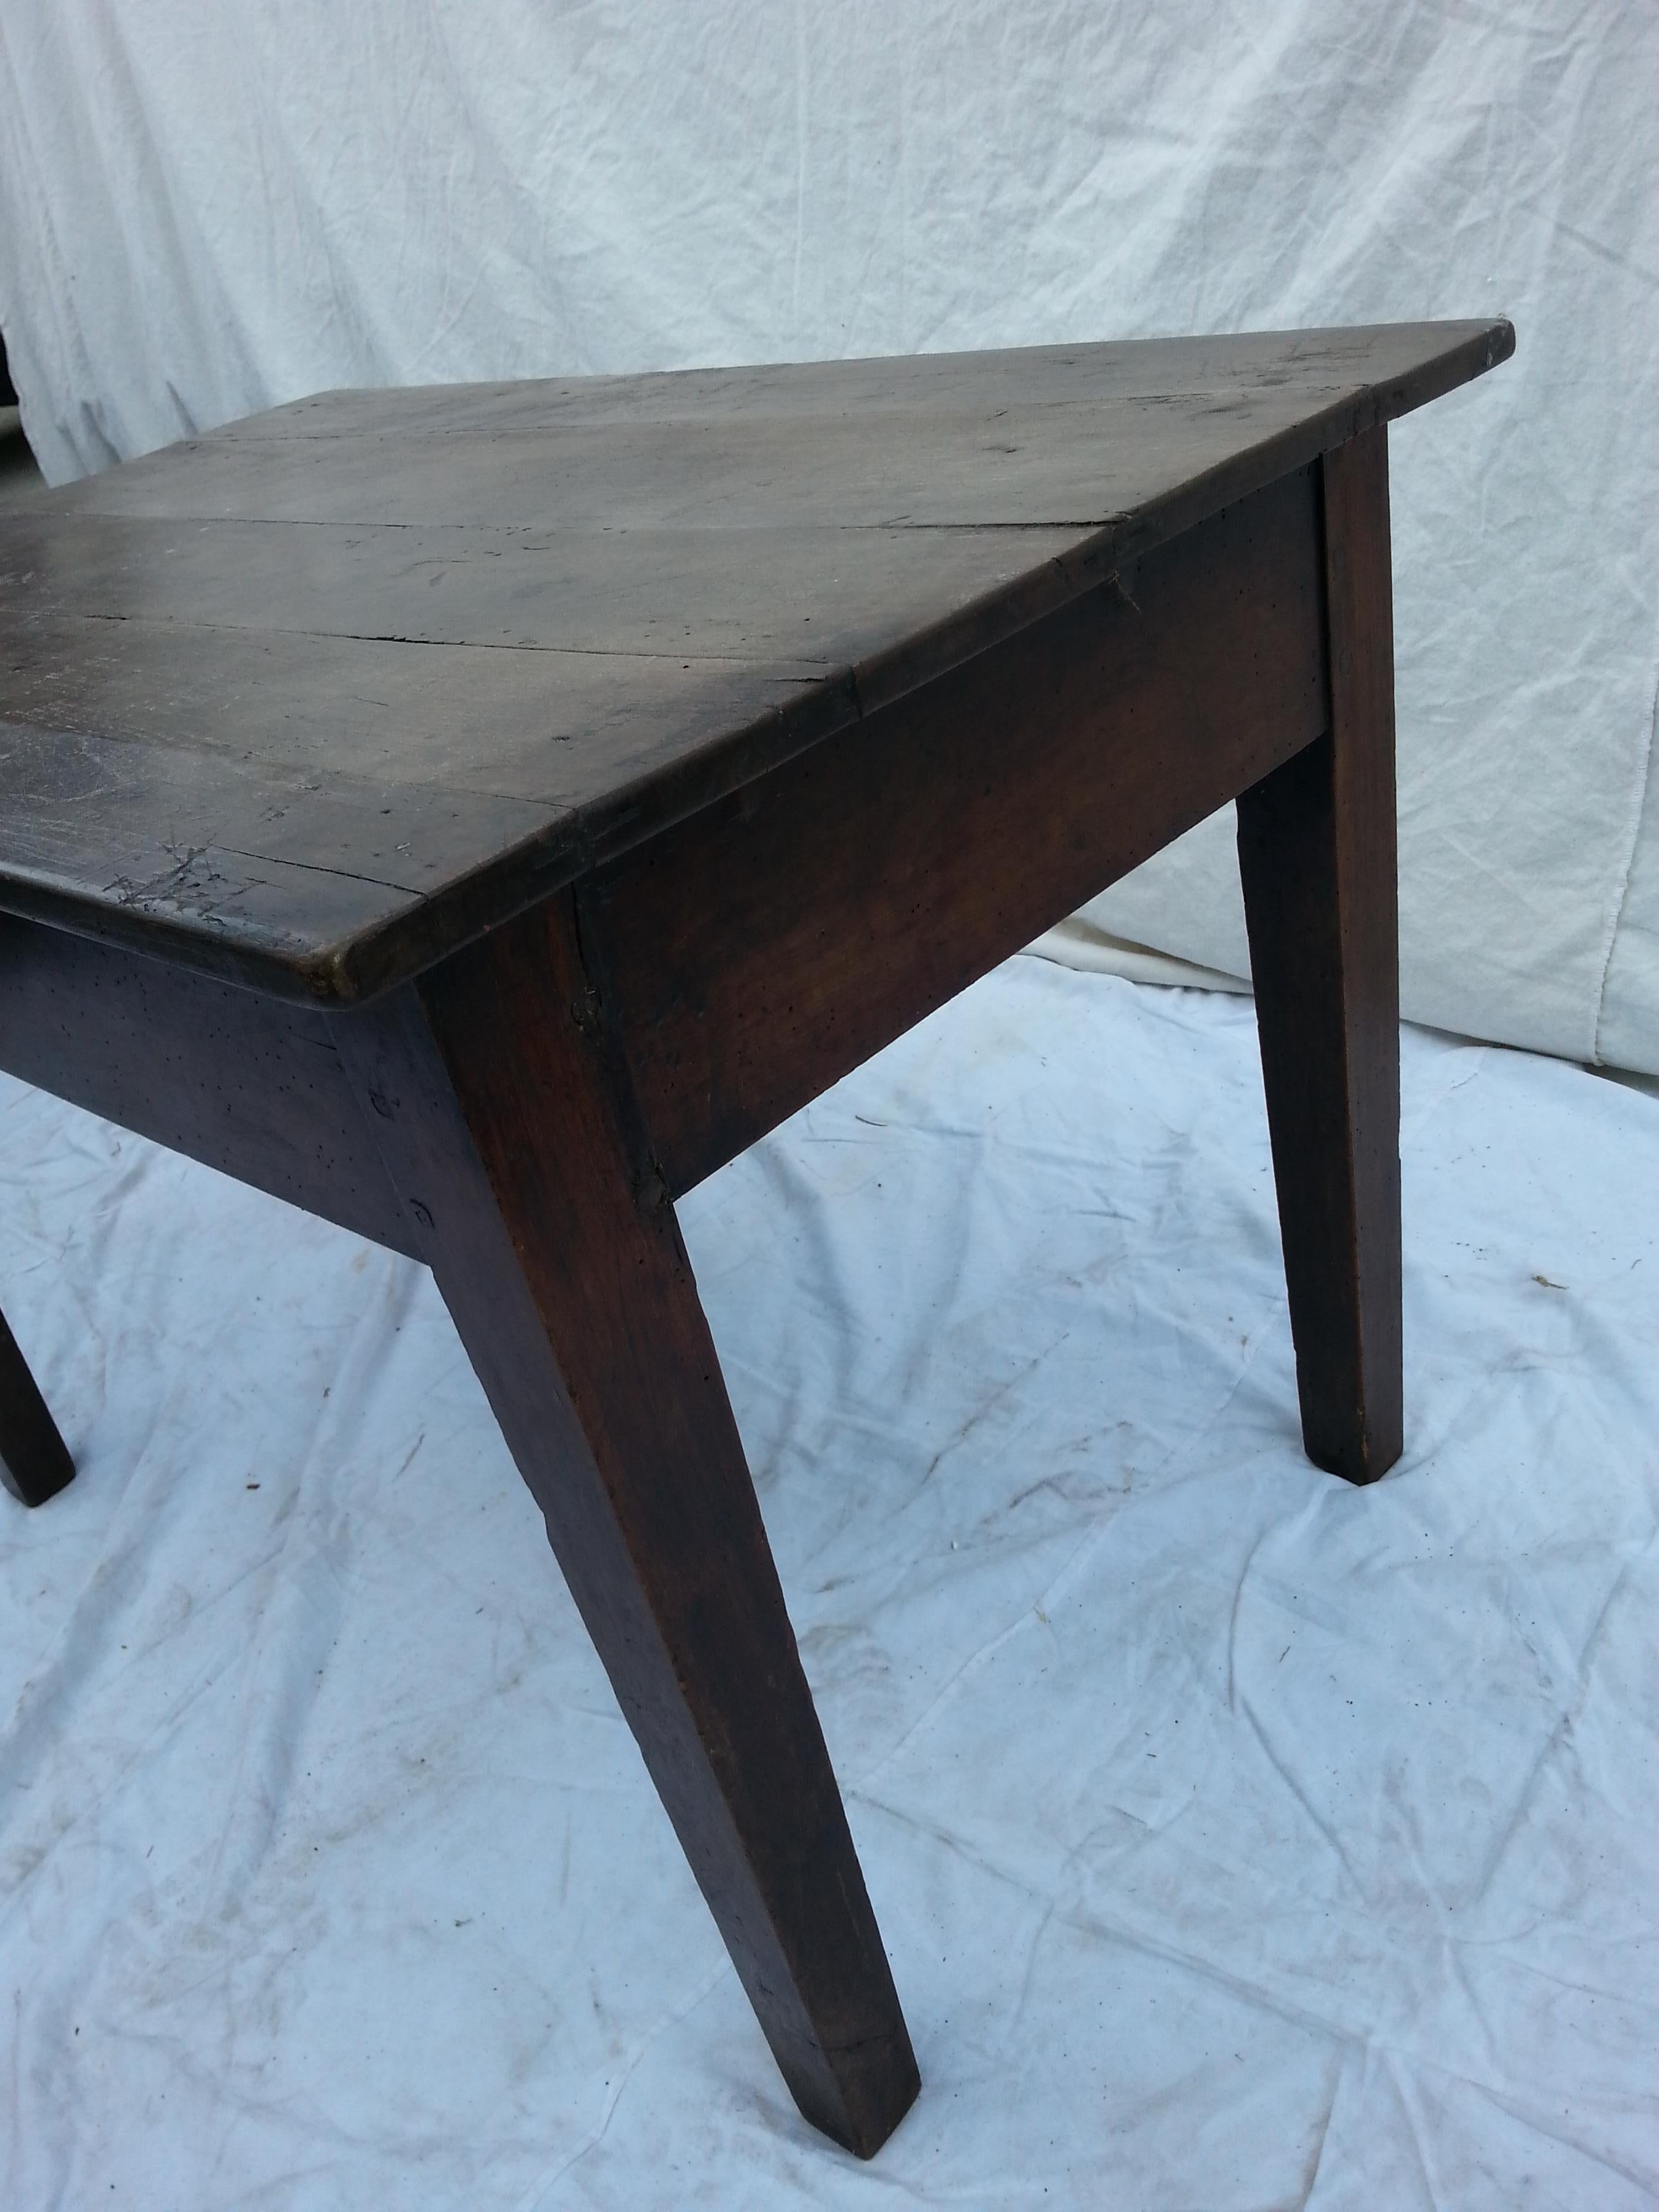 19th Century oak side table with walnut dark stain and straight legs. The top face of the table is made of five joined oak slats and wears expected scuffing and signs of use. Structurally sound and ready for a home.
 